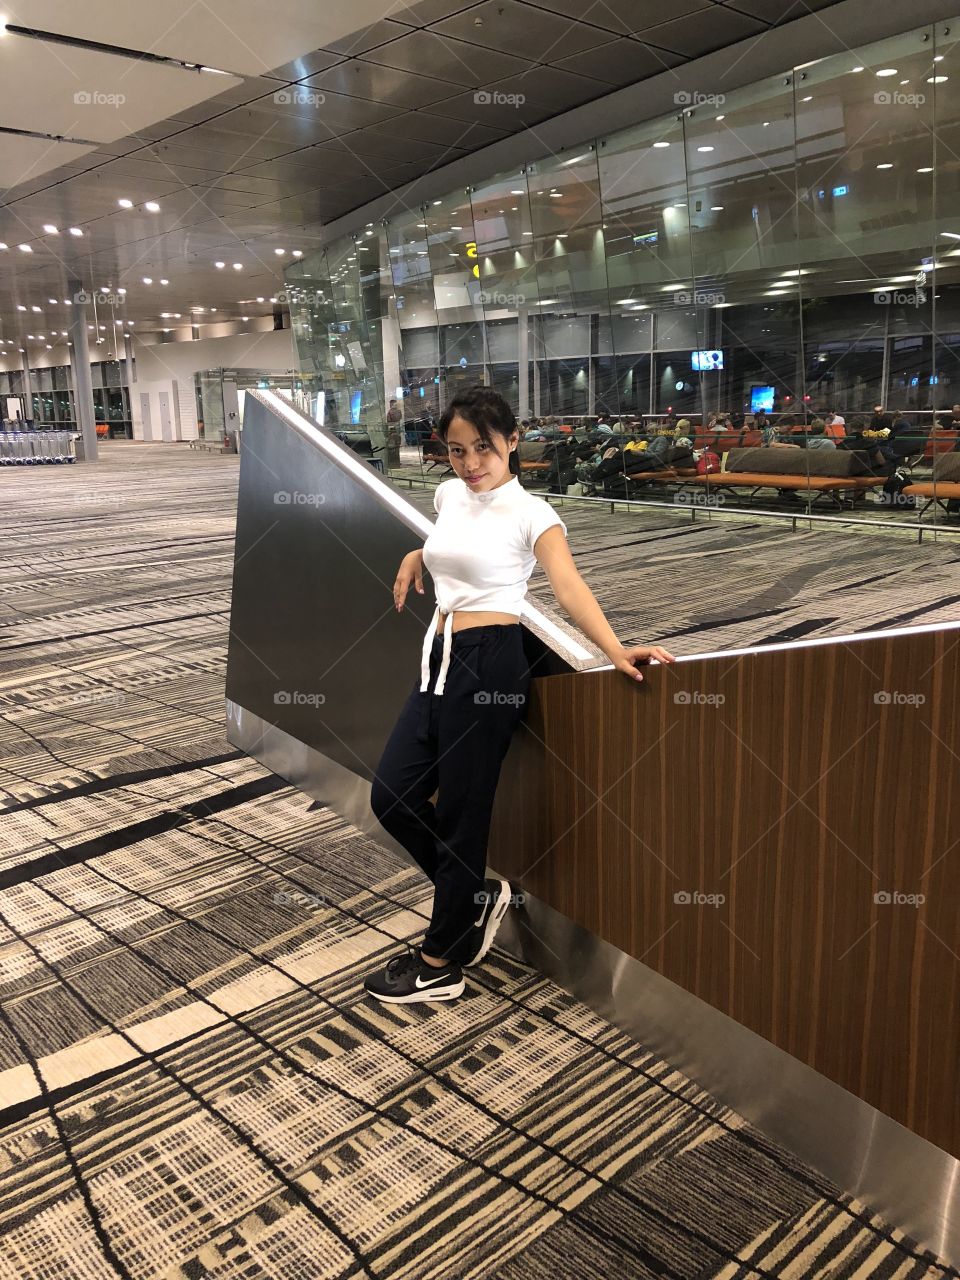 Slay Queen Slay at the Singapore Airport 